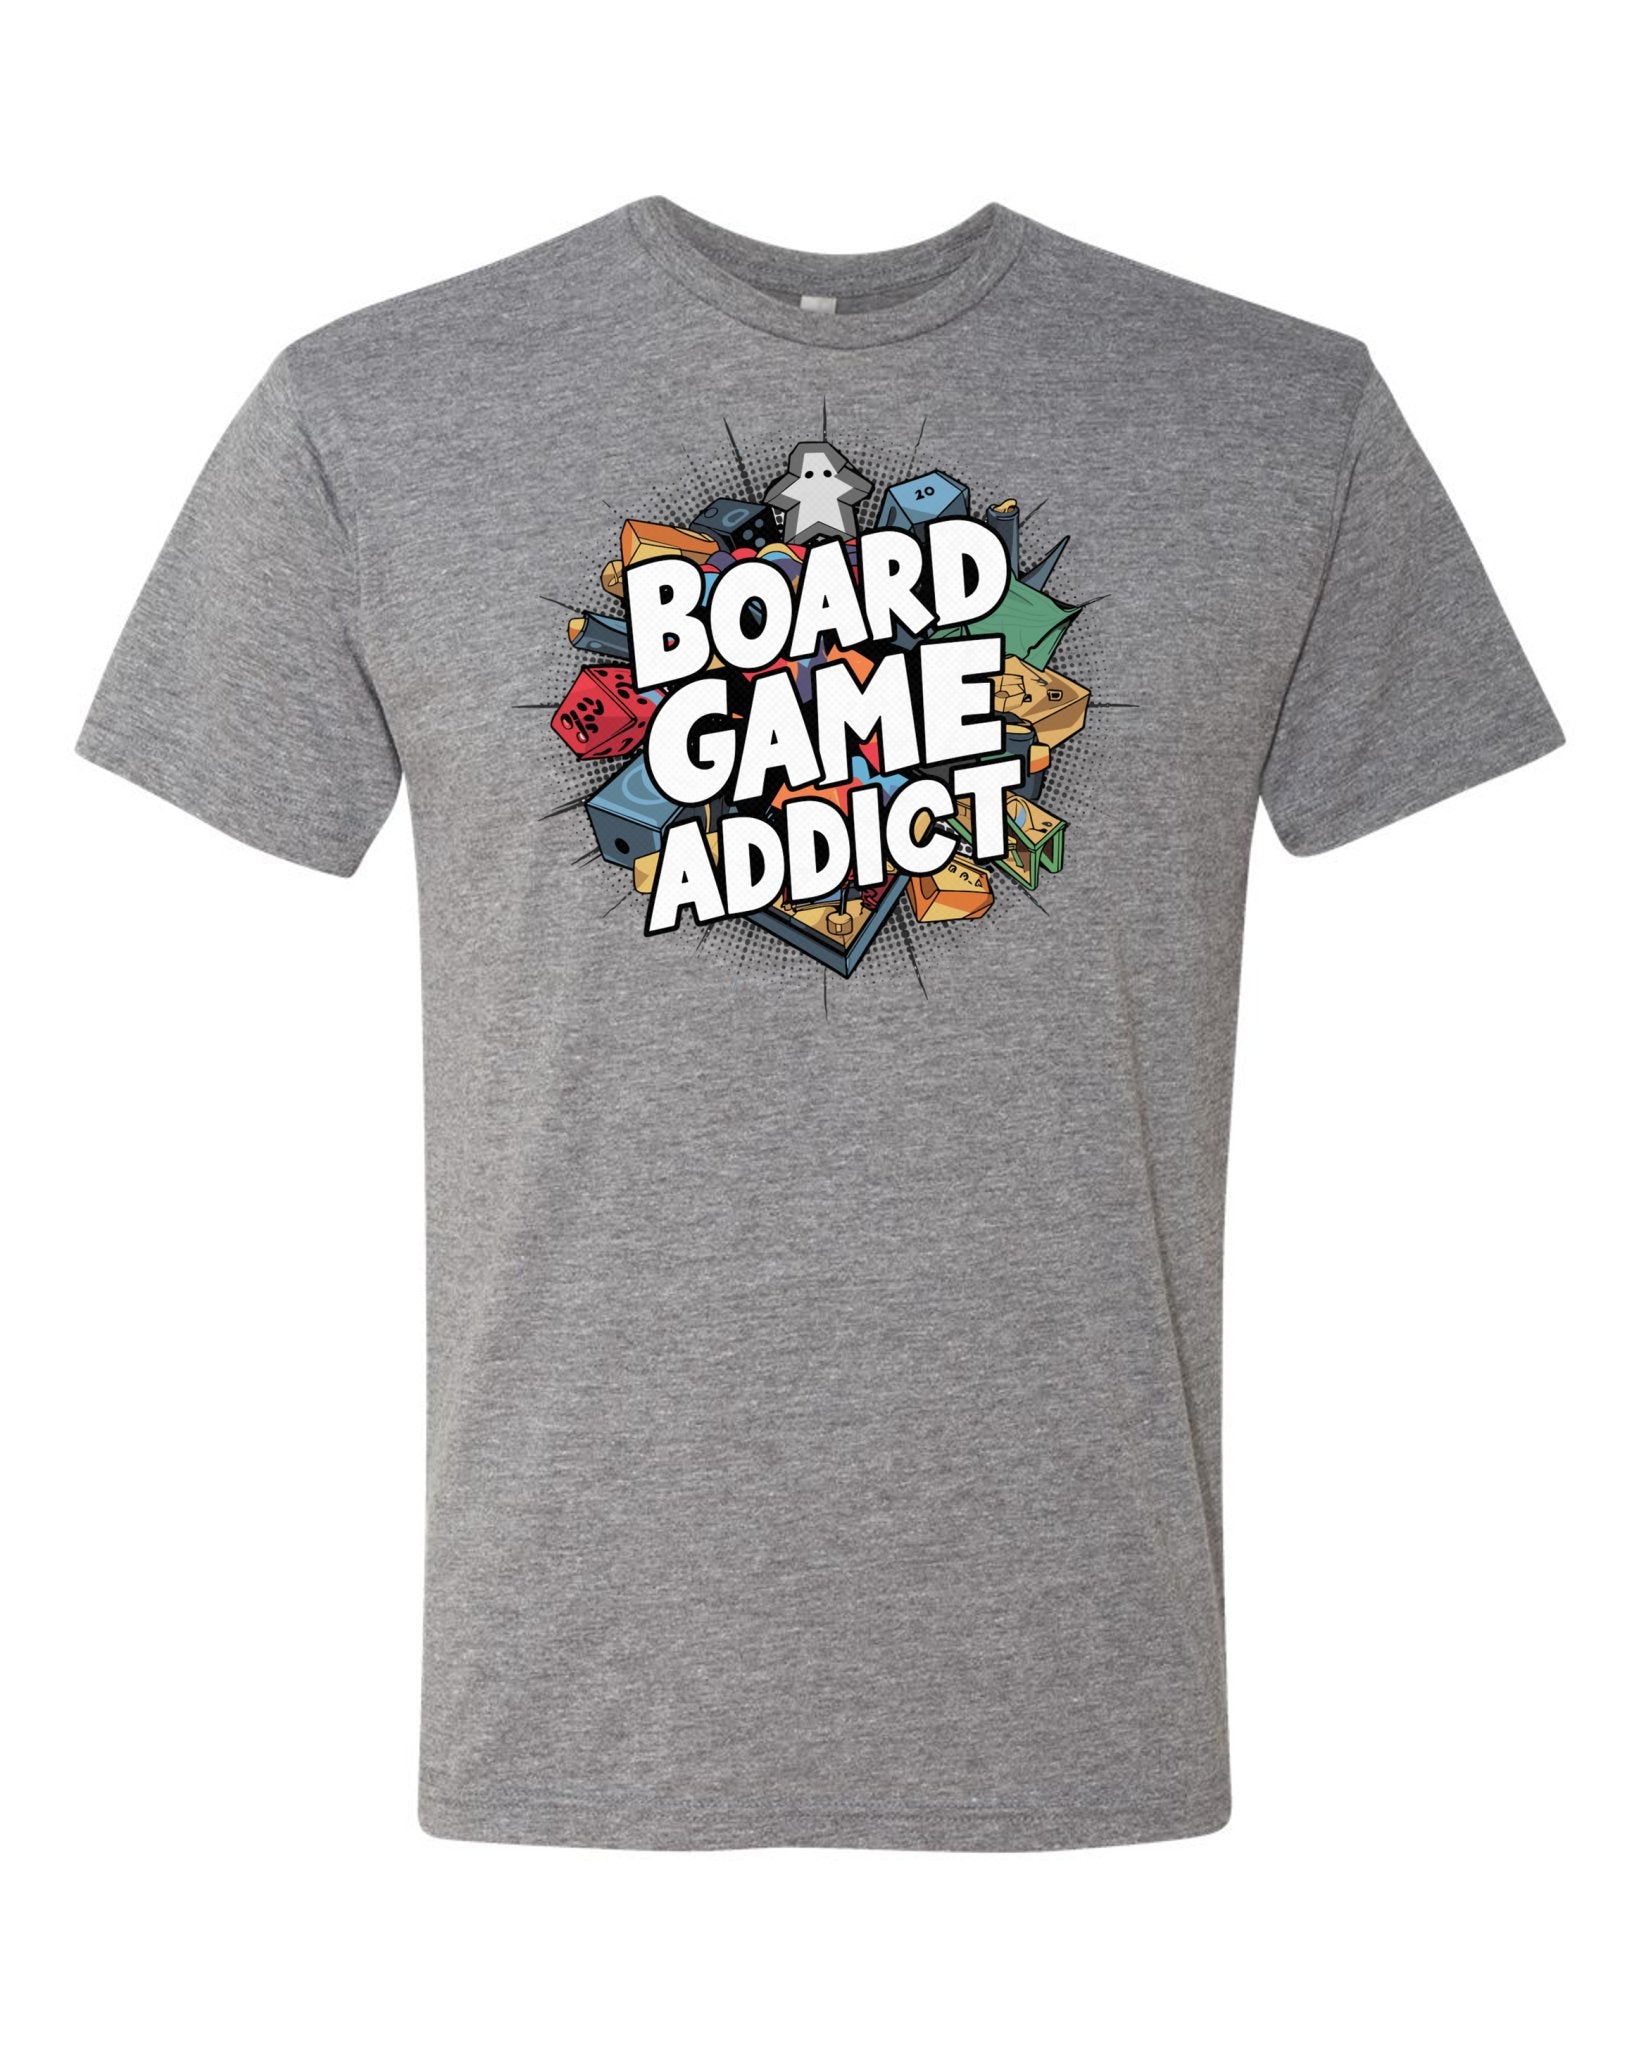 Get Your Game On: Premium Heather Grey Board Game Addict Tee | Limited Edition -